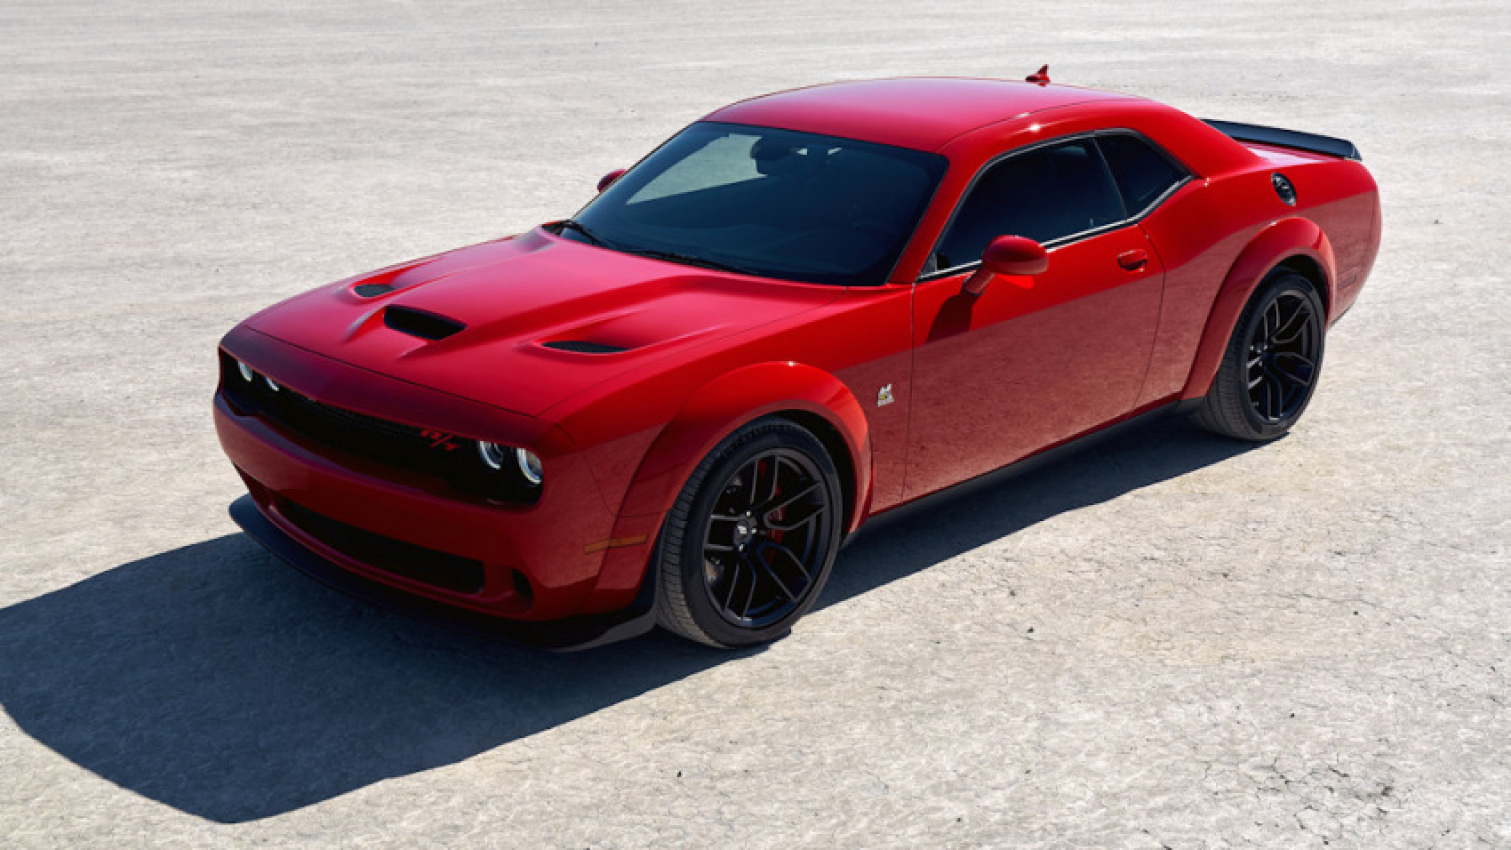 autos, cars, dodge, ford, dodge challenger, dodge corporate, ford mustang, news, sports car, the dodge challenger breaks ford mustang's streak as best-selling muscle car